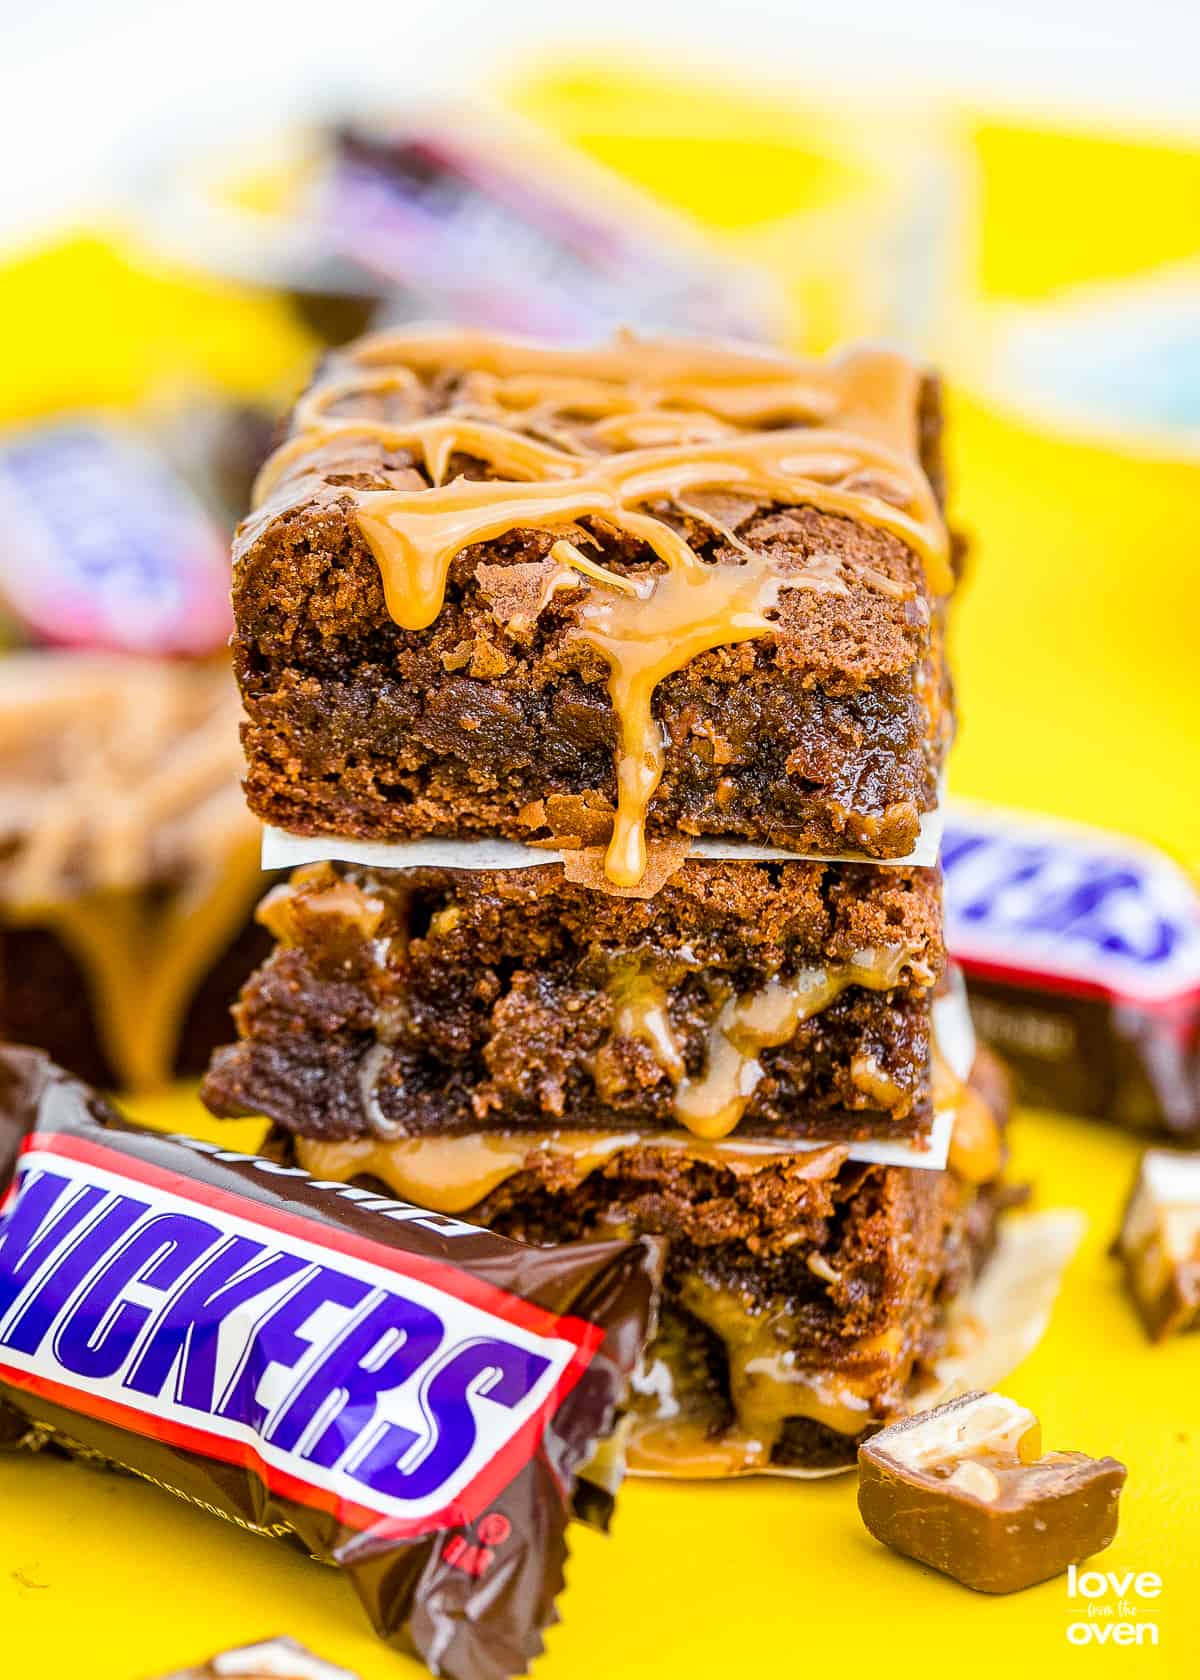 Snickers Peanut Brownie Squares Share Size Chocolate Candy Bar